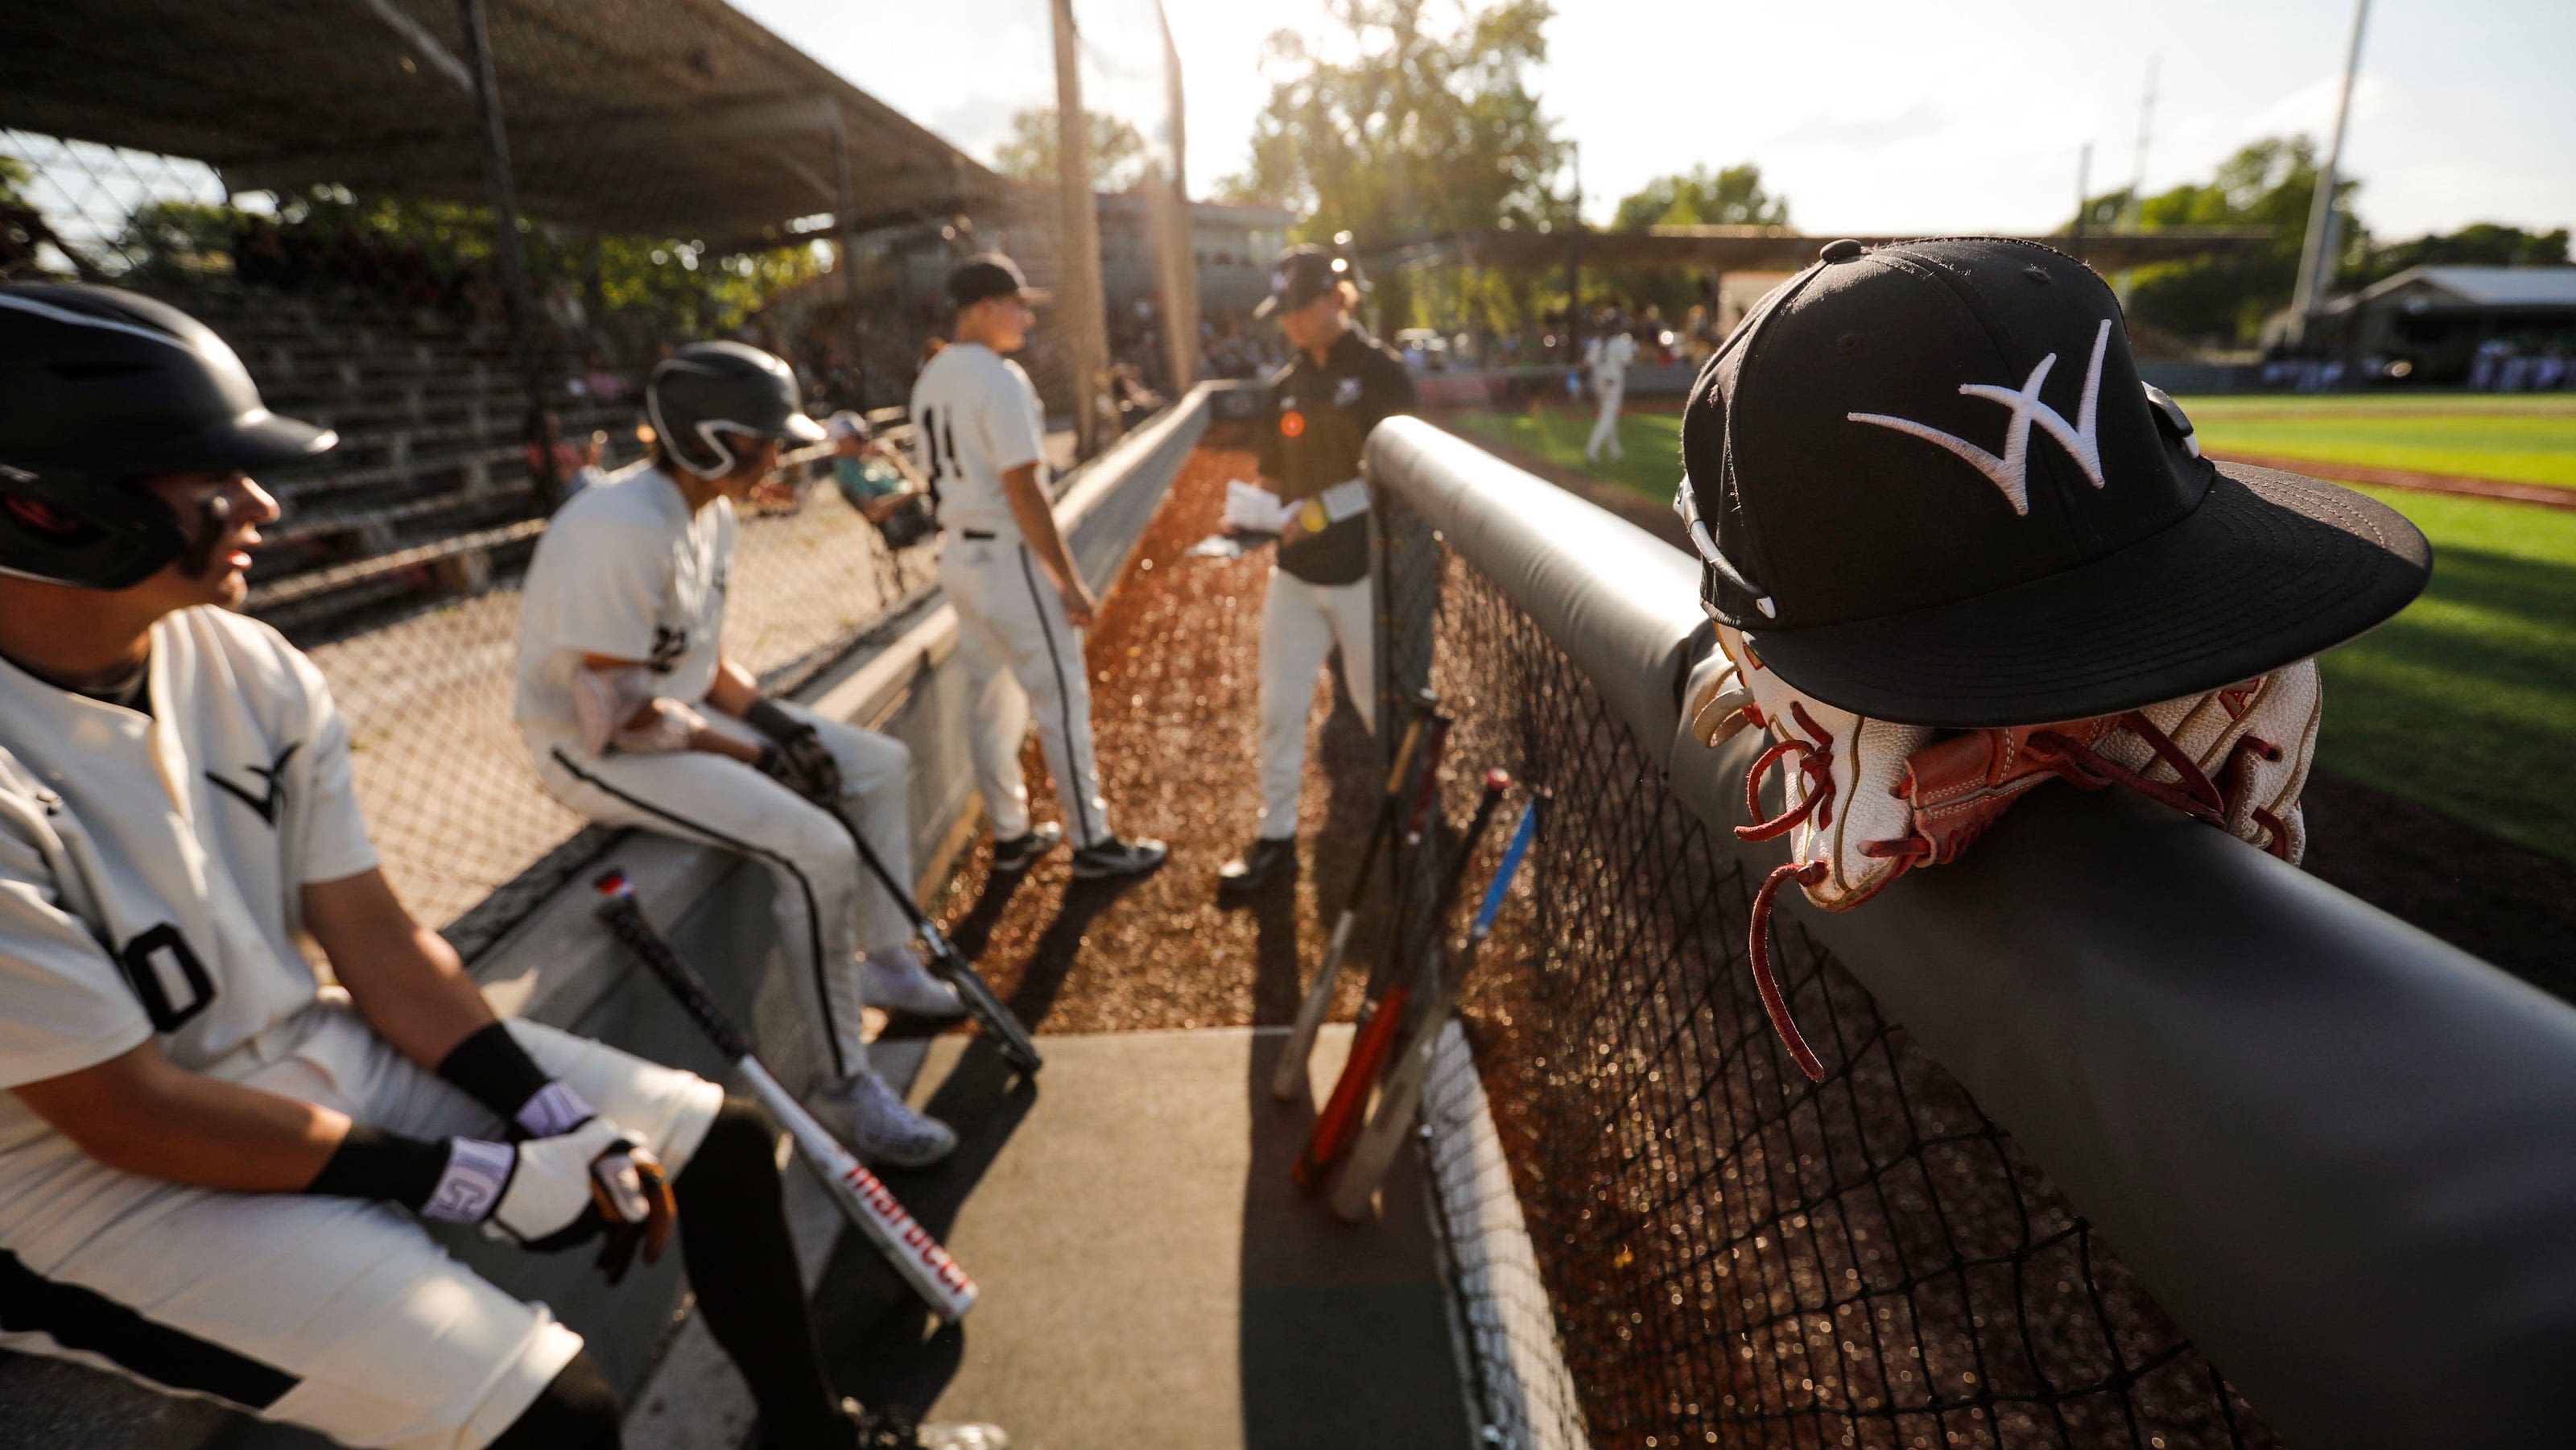 Speeches, bus rides and Katy Perry: Behind the scenes with top-ranked Willard baseball